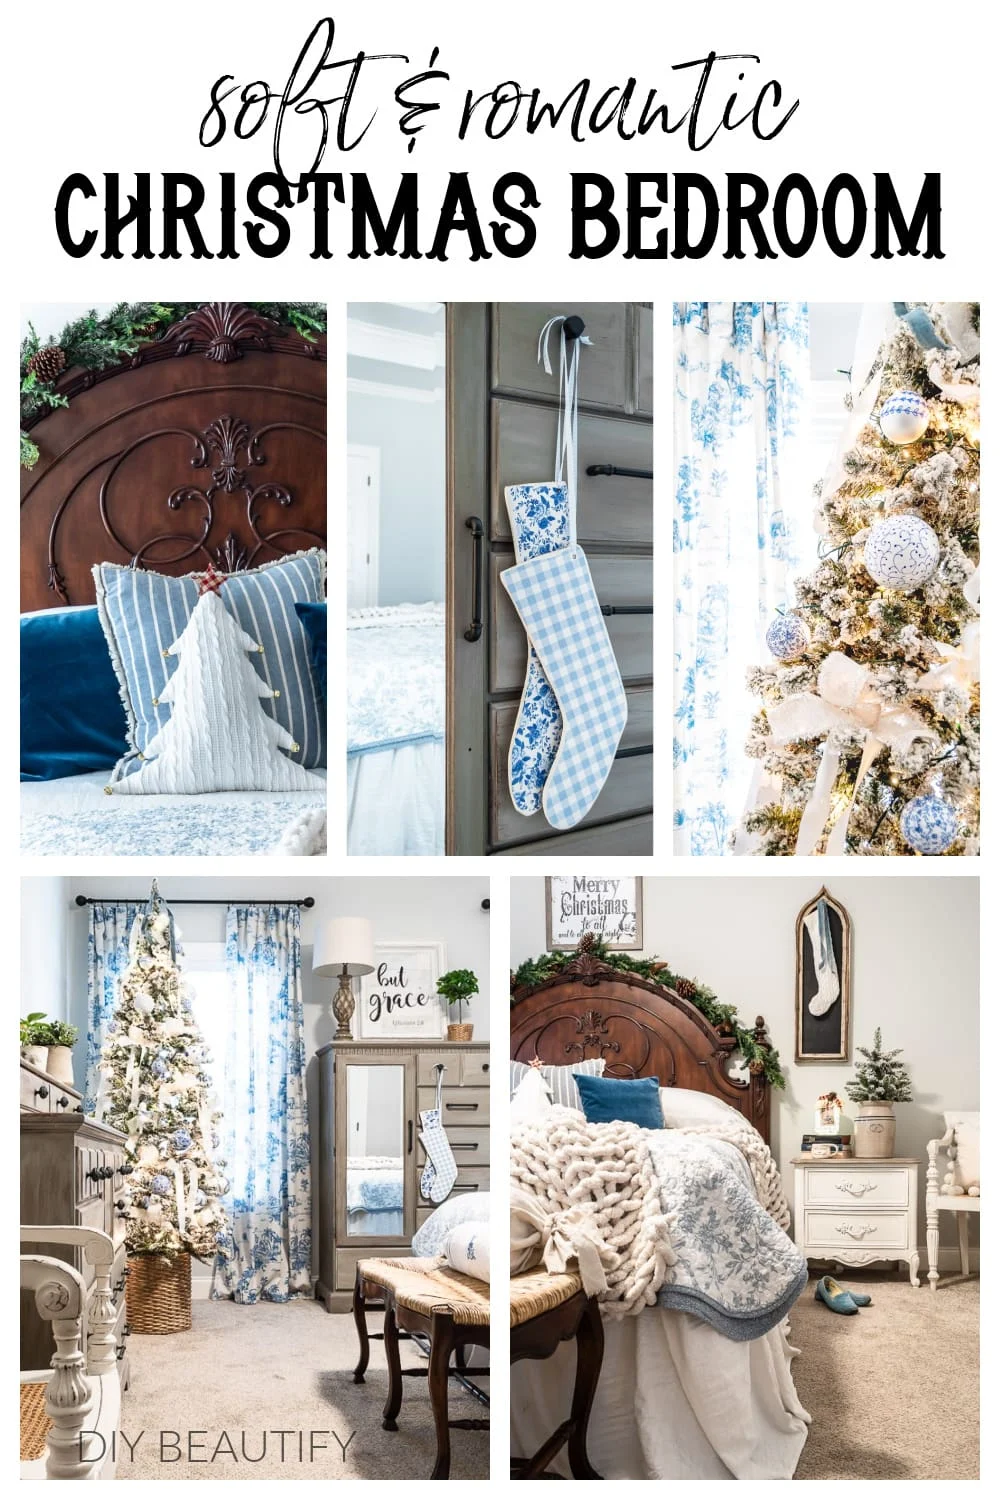 blue and white floral and gingham Christmas bedroom with decorated tree, toile curtains